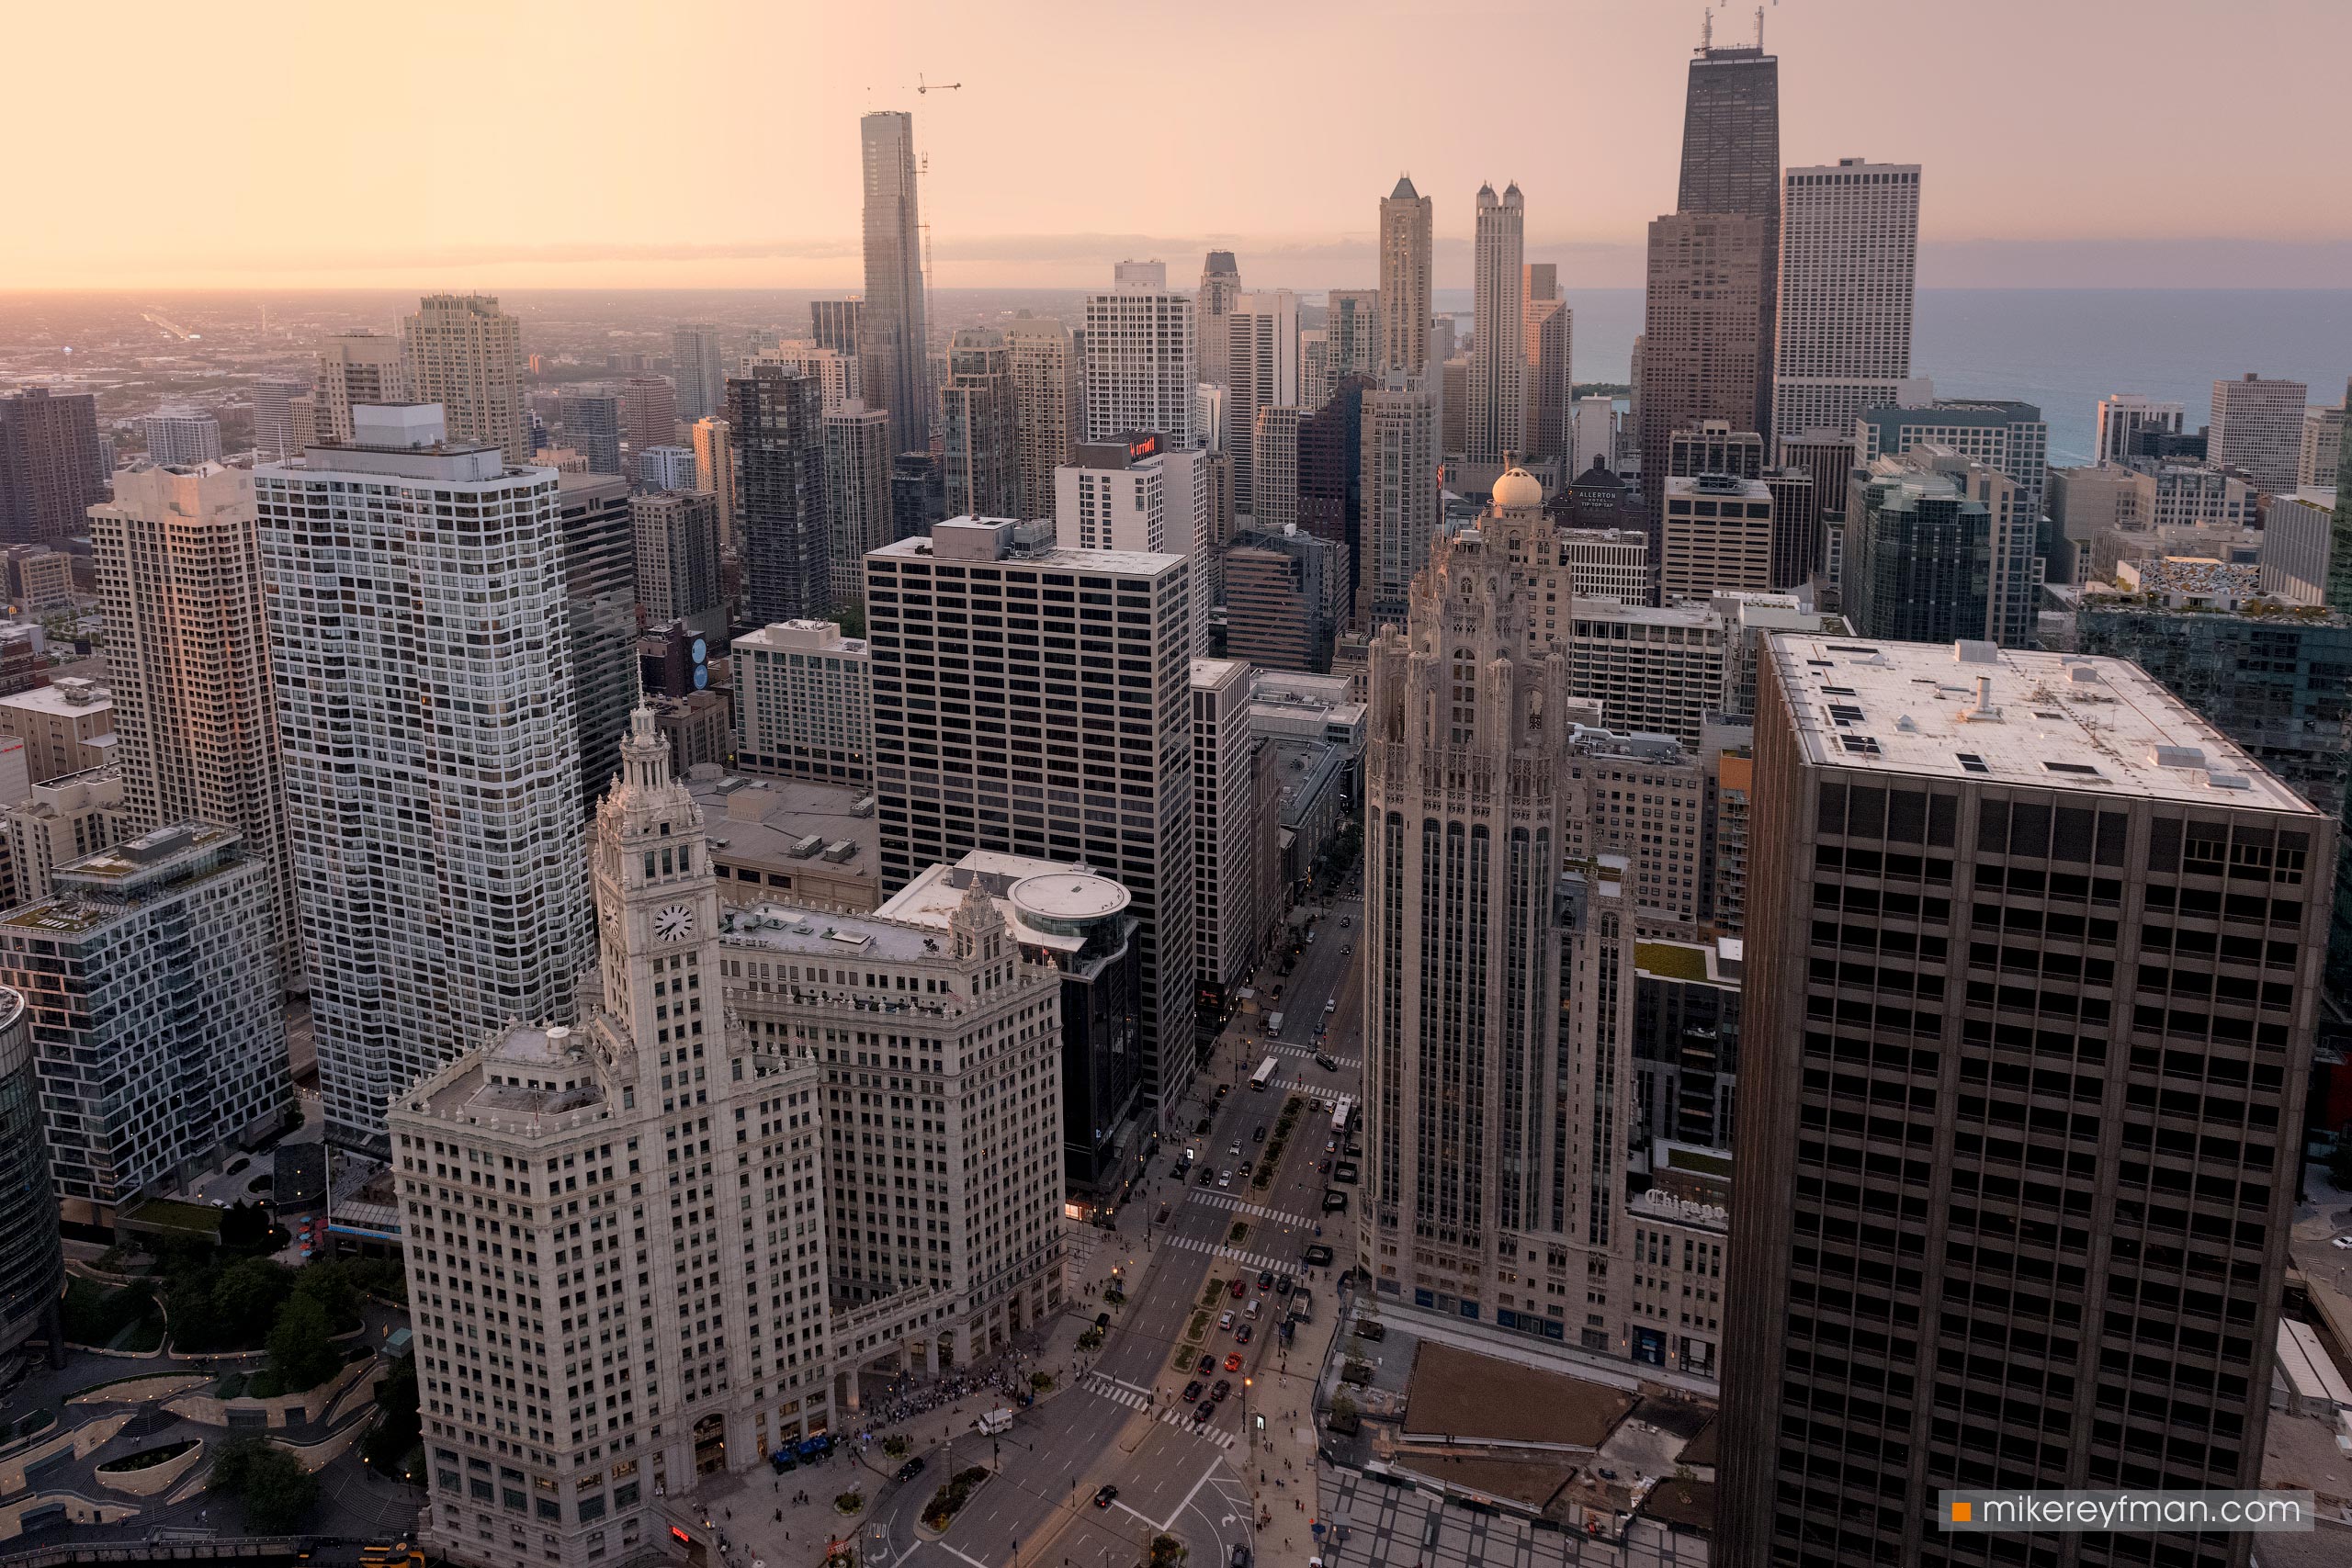 Chicago's Historic Skyscrapers: Wrigley Building and Tribune Tower.  Chicago, Illinois, USA 019-CH-2_ZRA10099 - Ever-beating architectural heart of America. The birthplace of the most iconic buildings in the country. - Mike Reyfman Photography